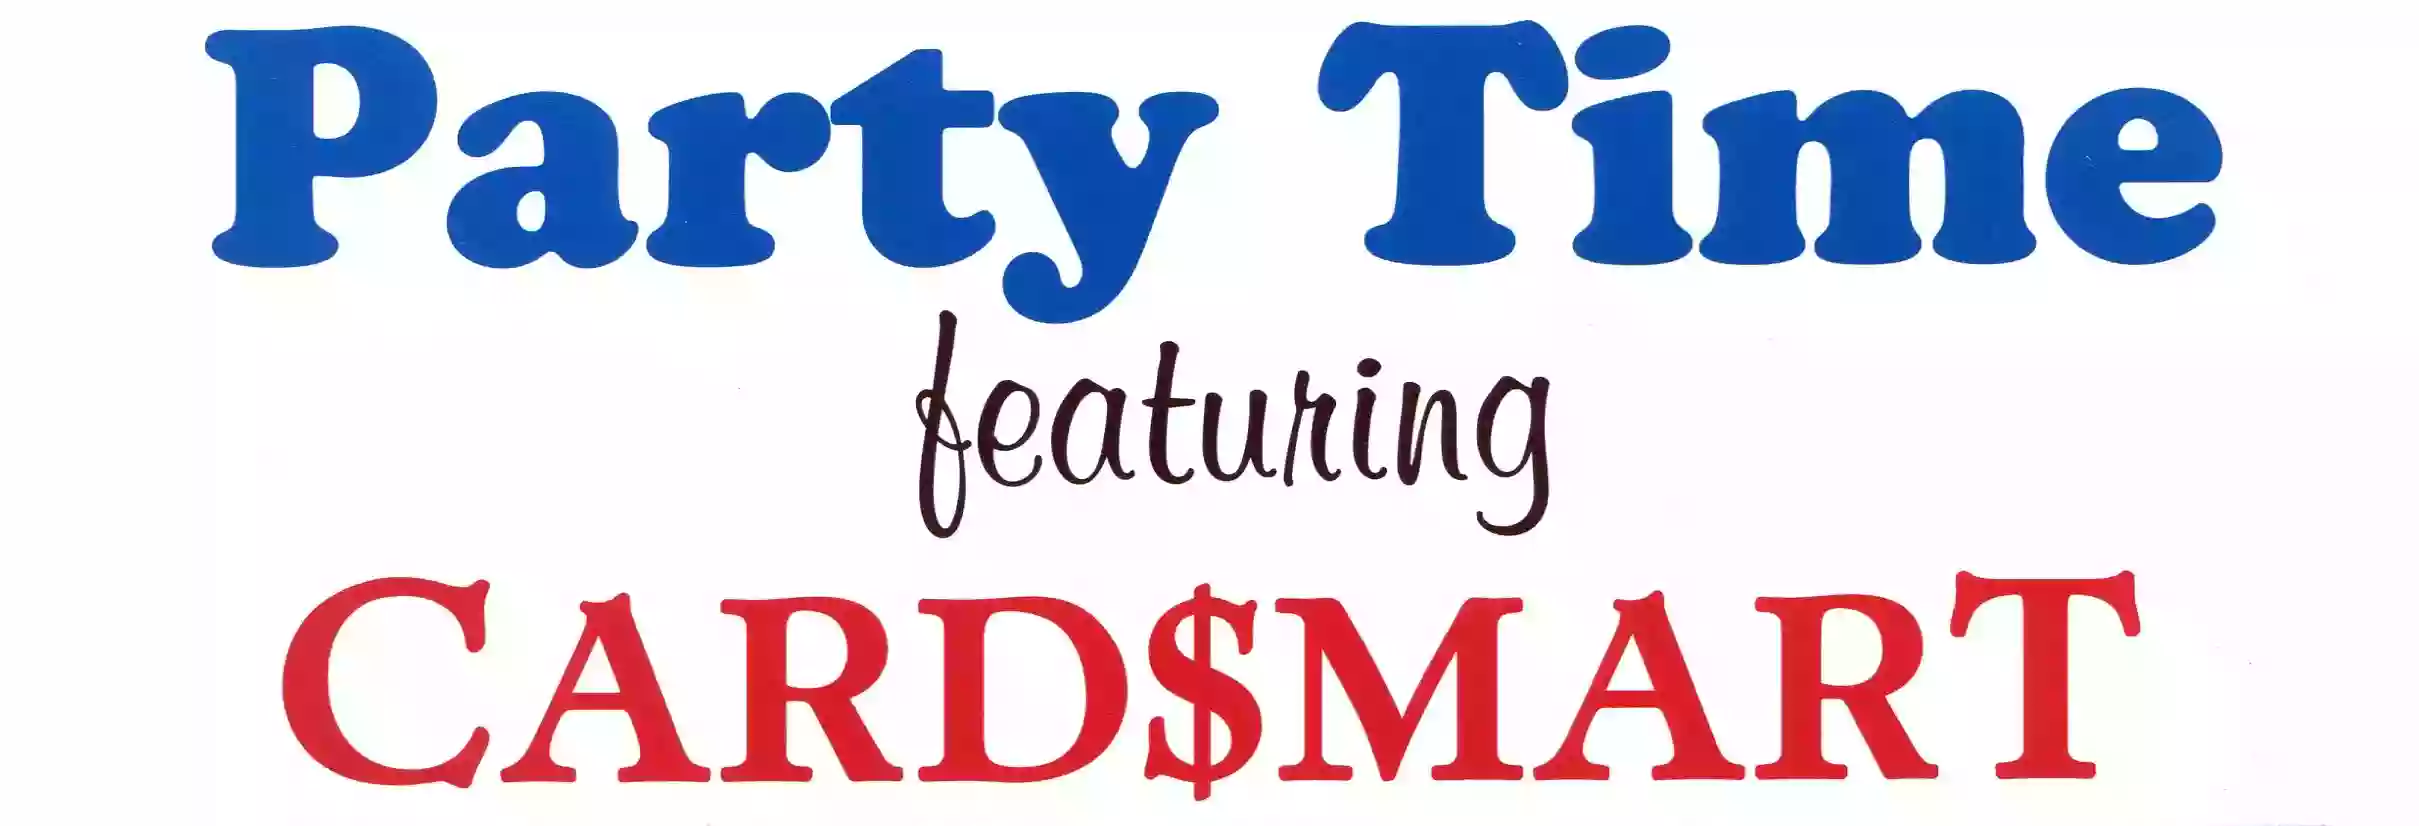 Party Time featuring Card$mart